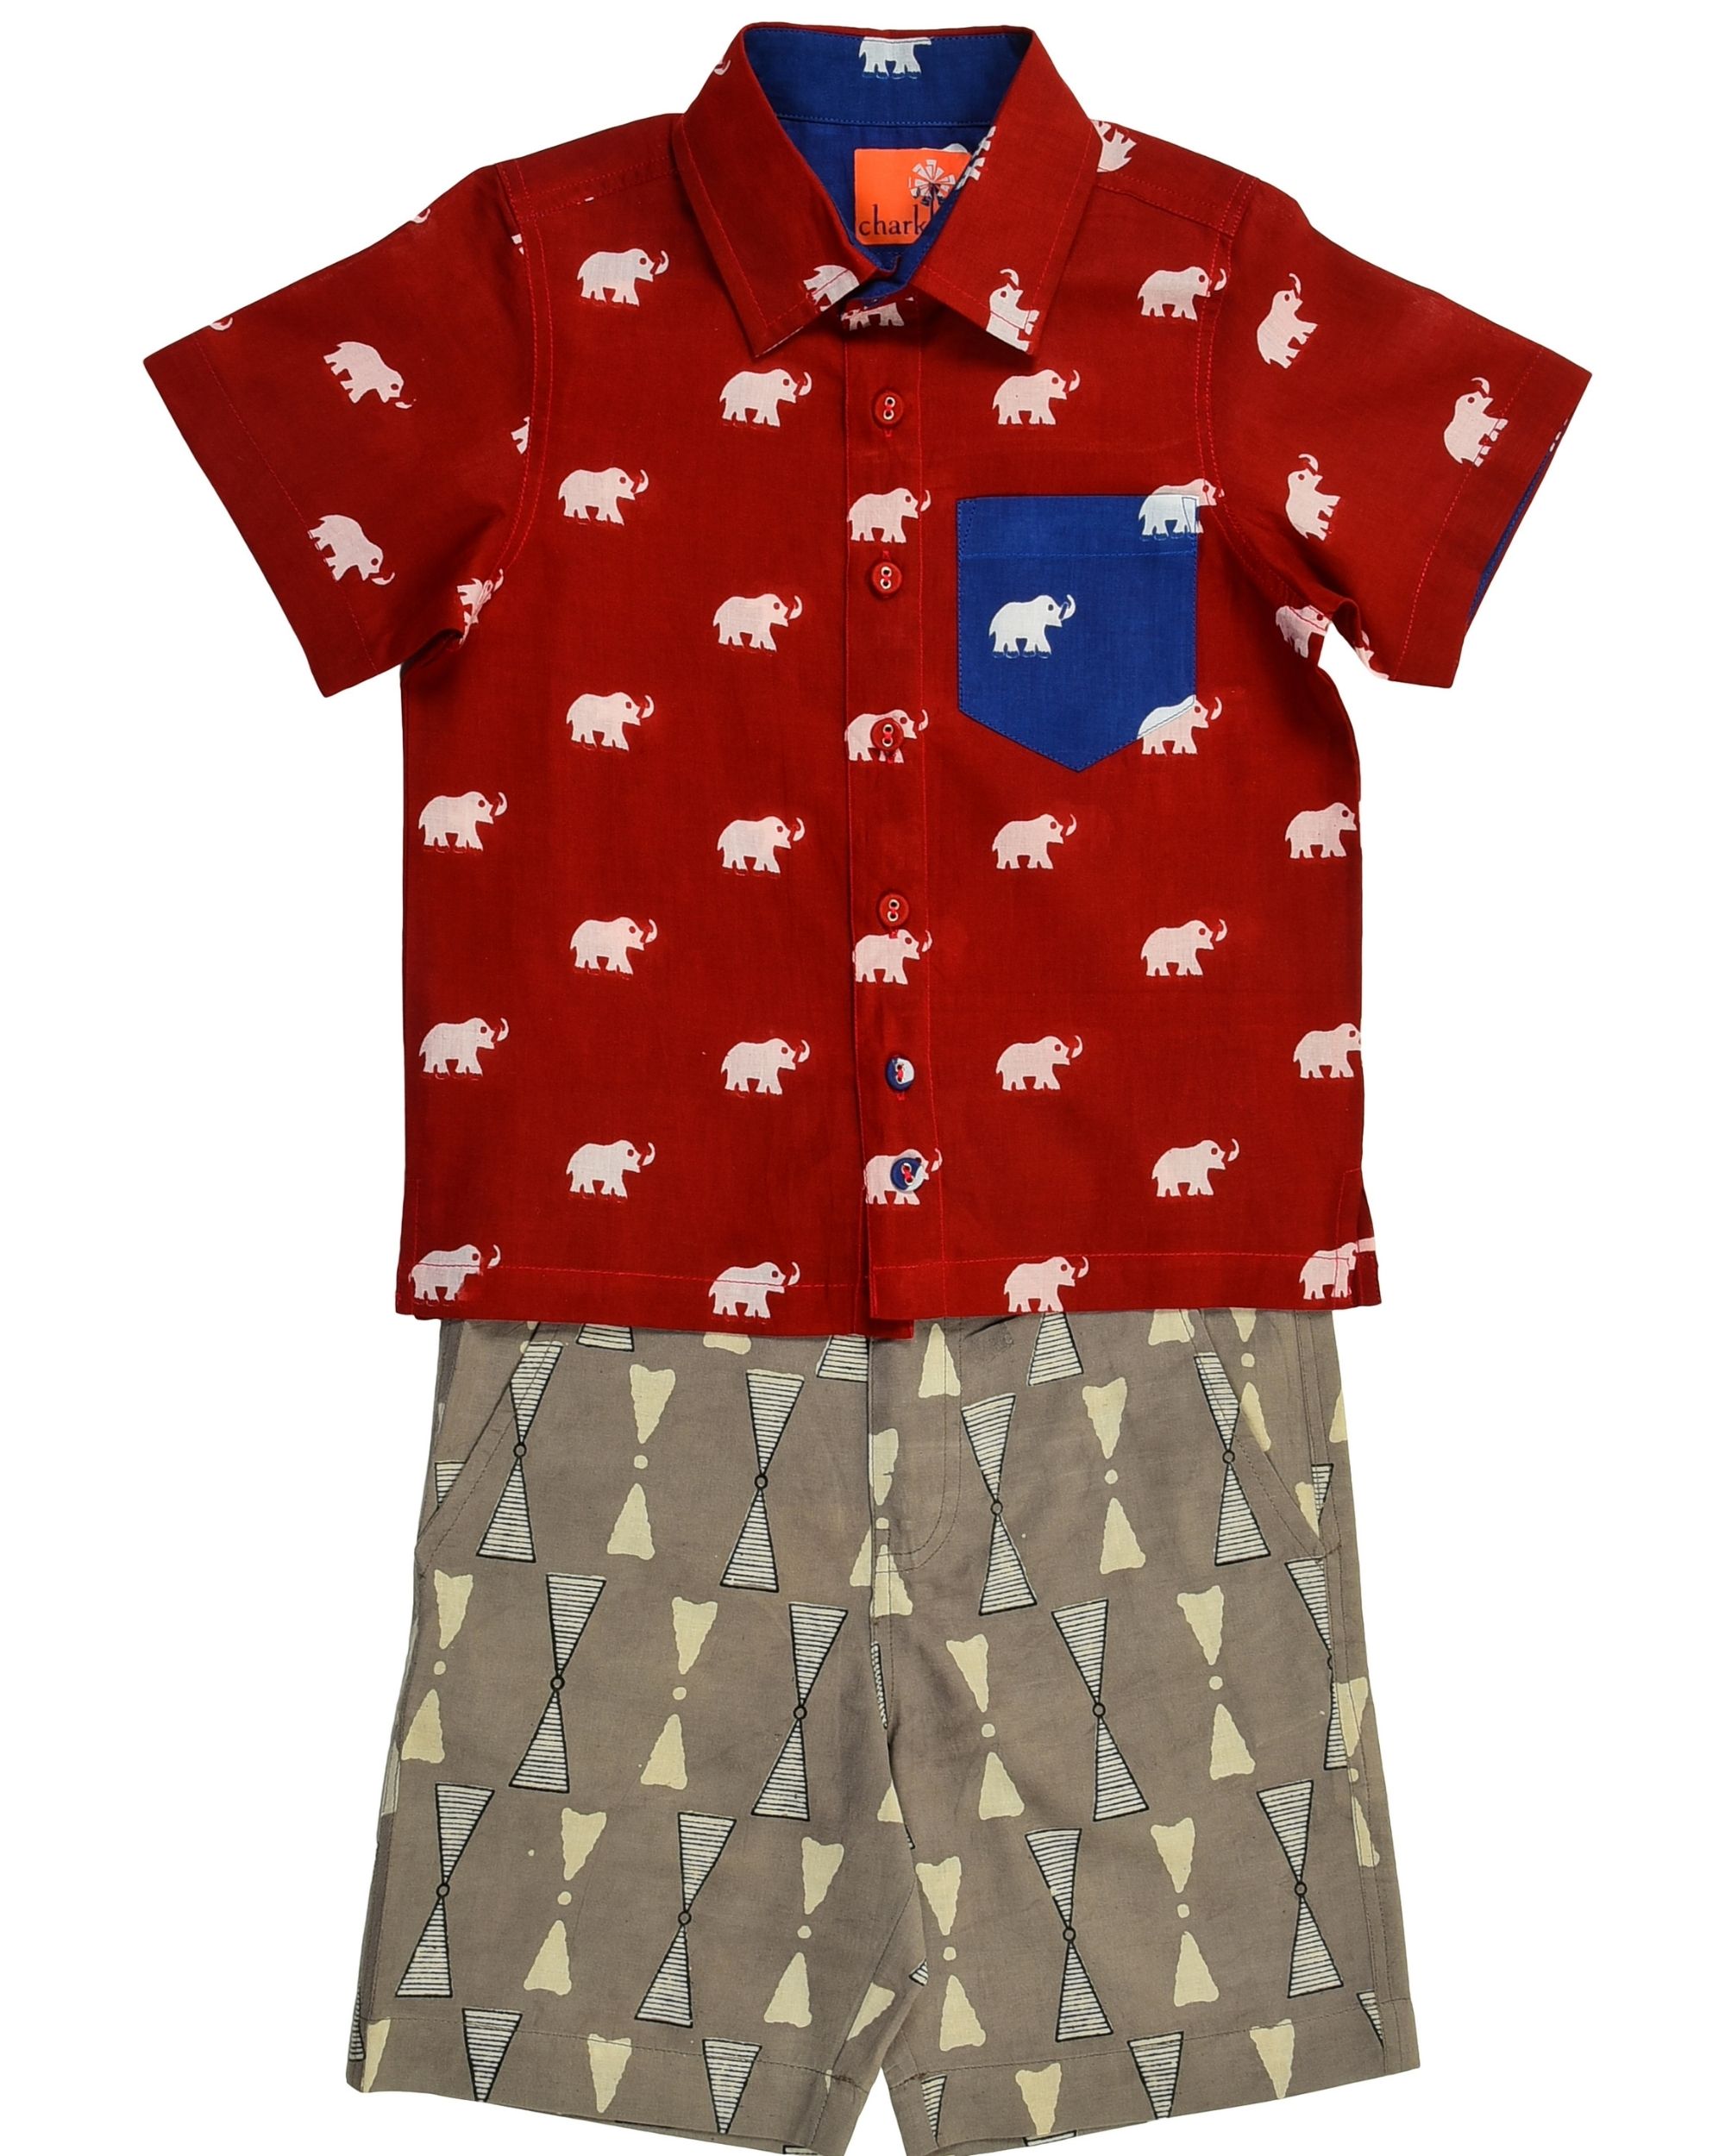 Red elephant printed shirt with grey shorts - set of two